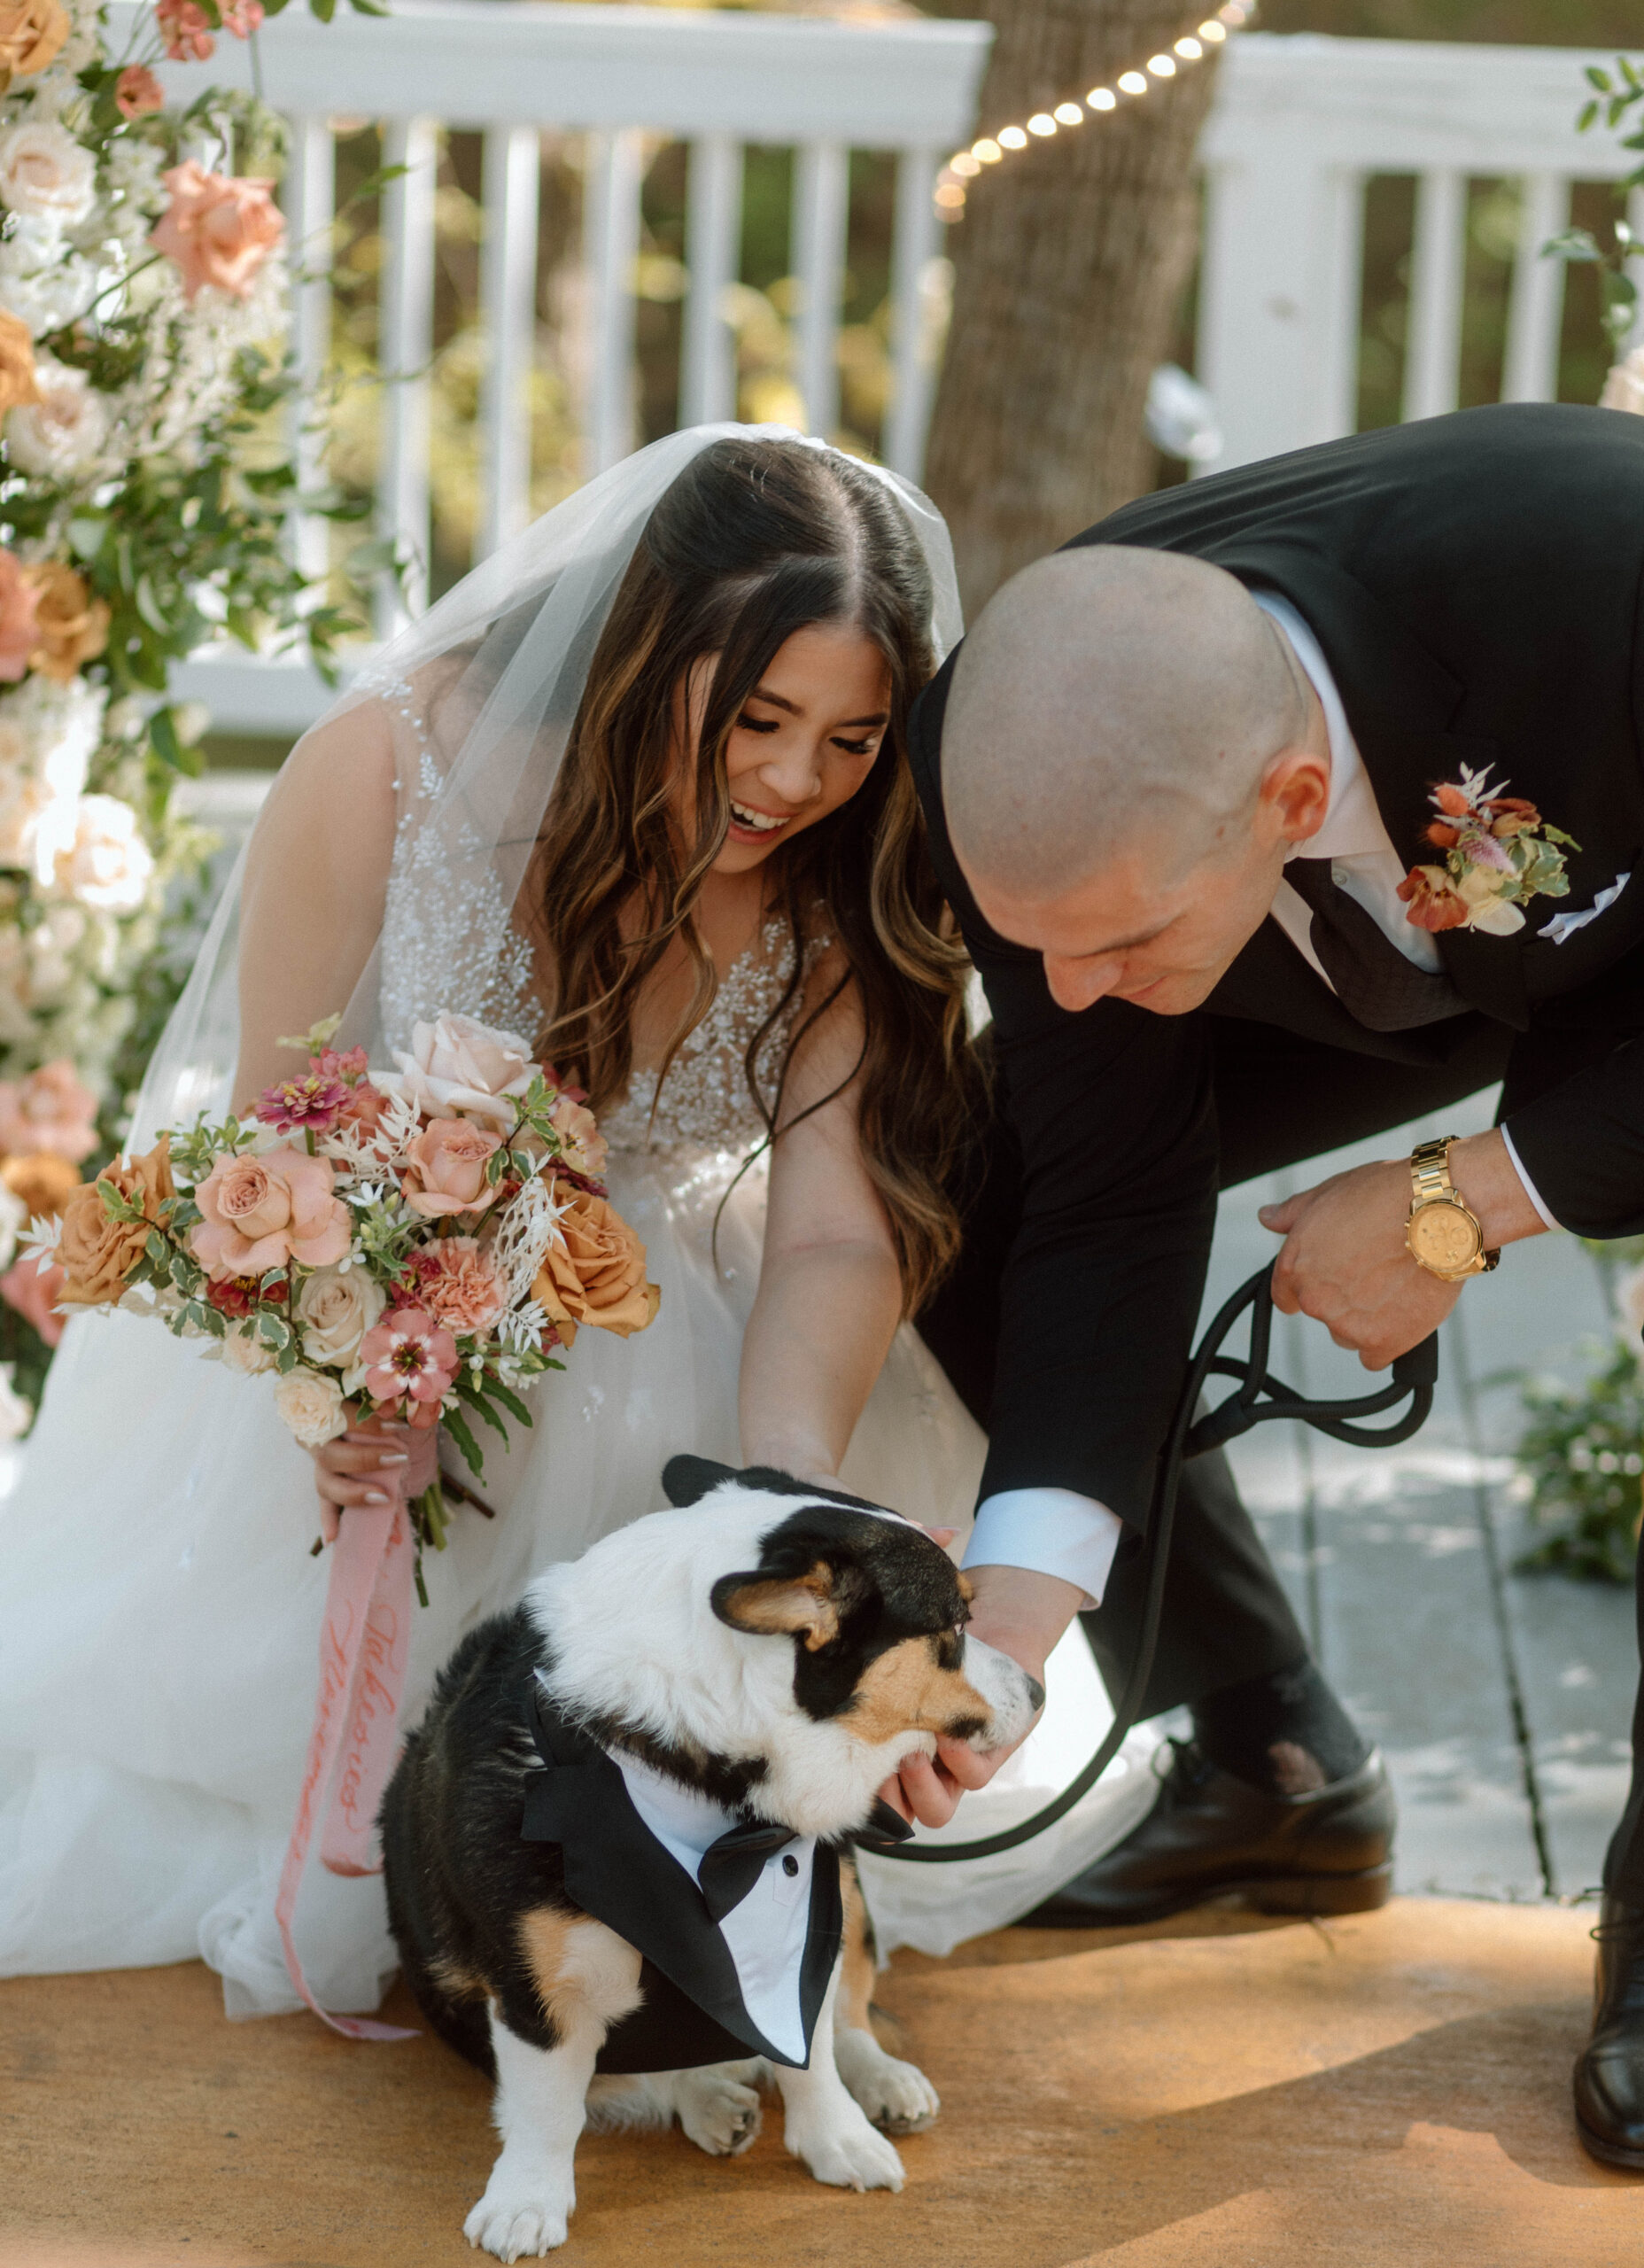 Wedding photos with your dog in tux